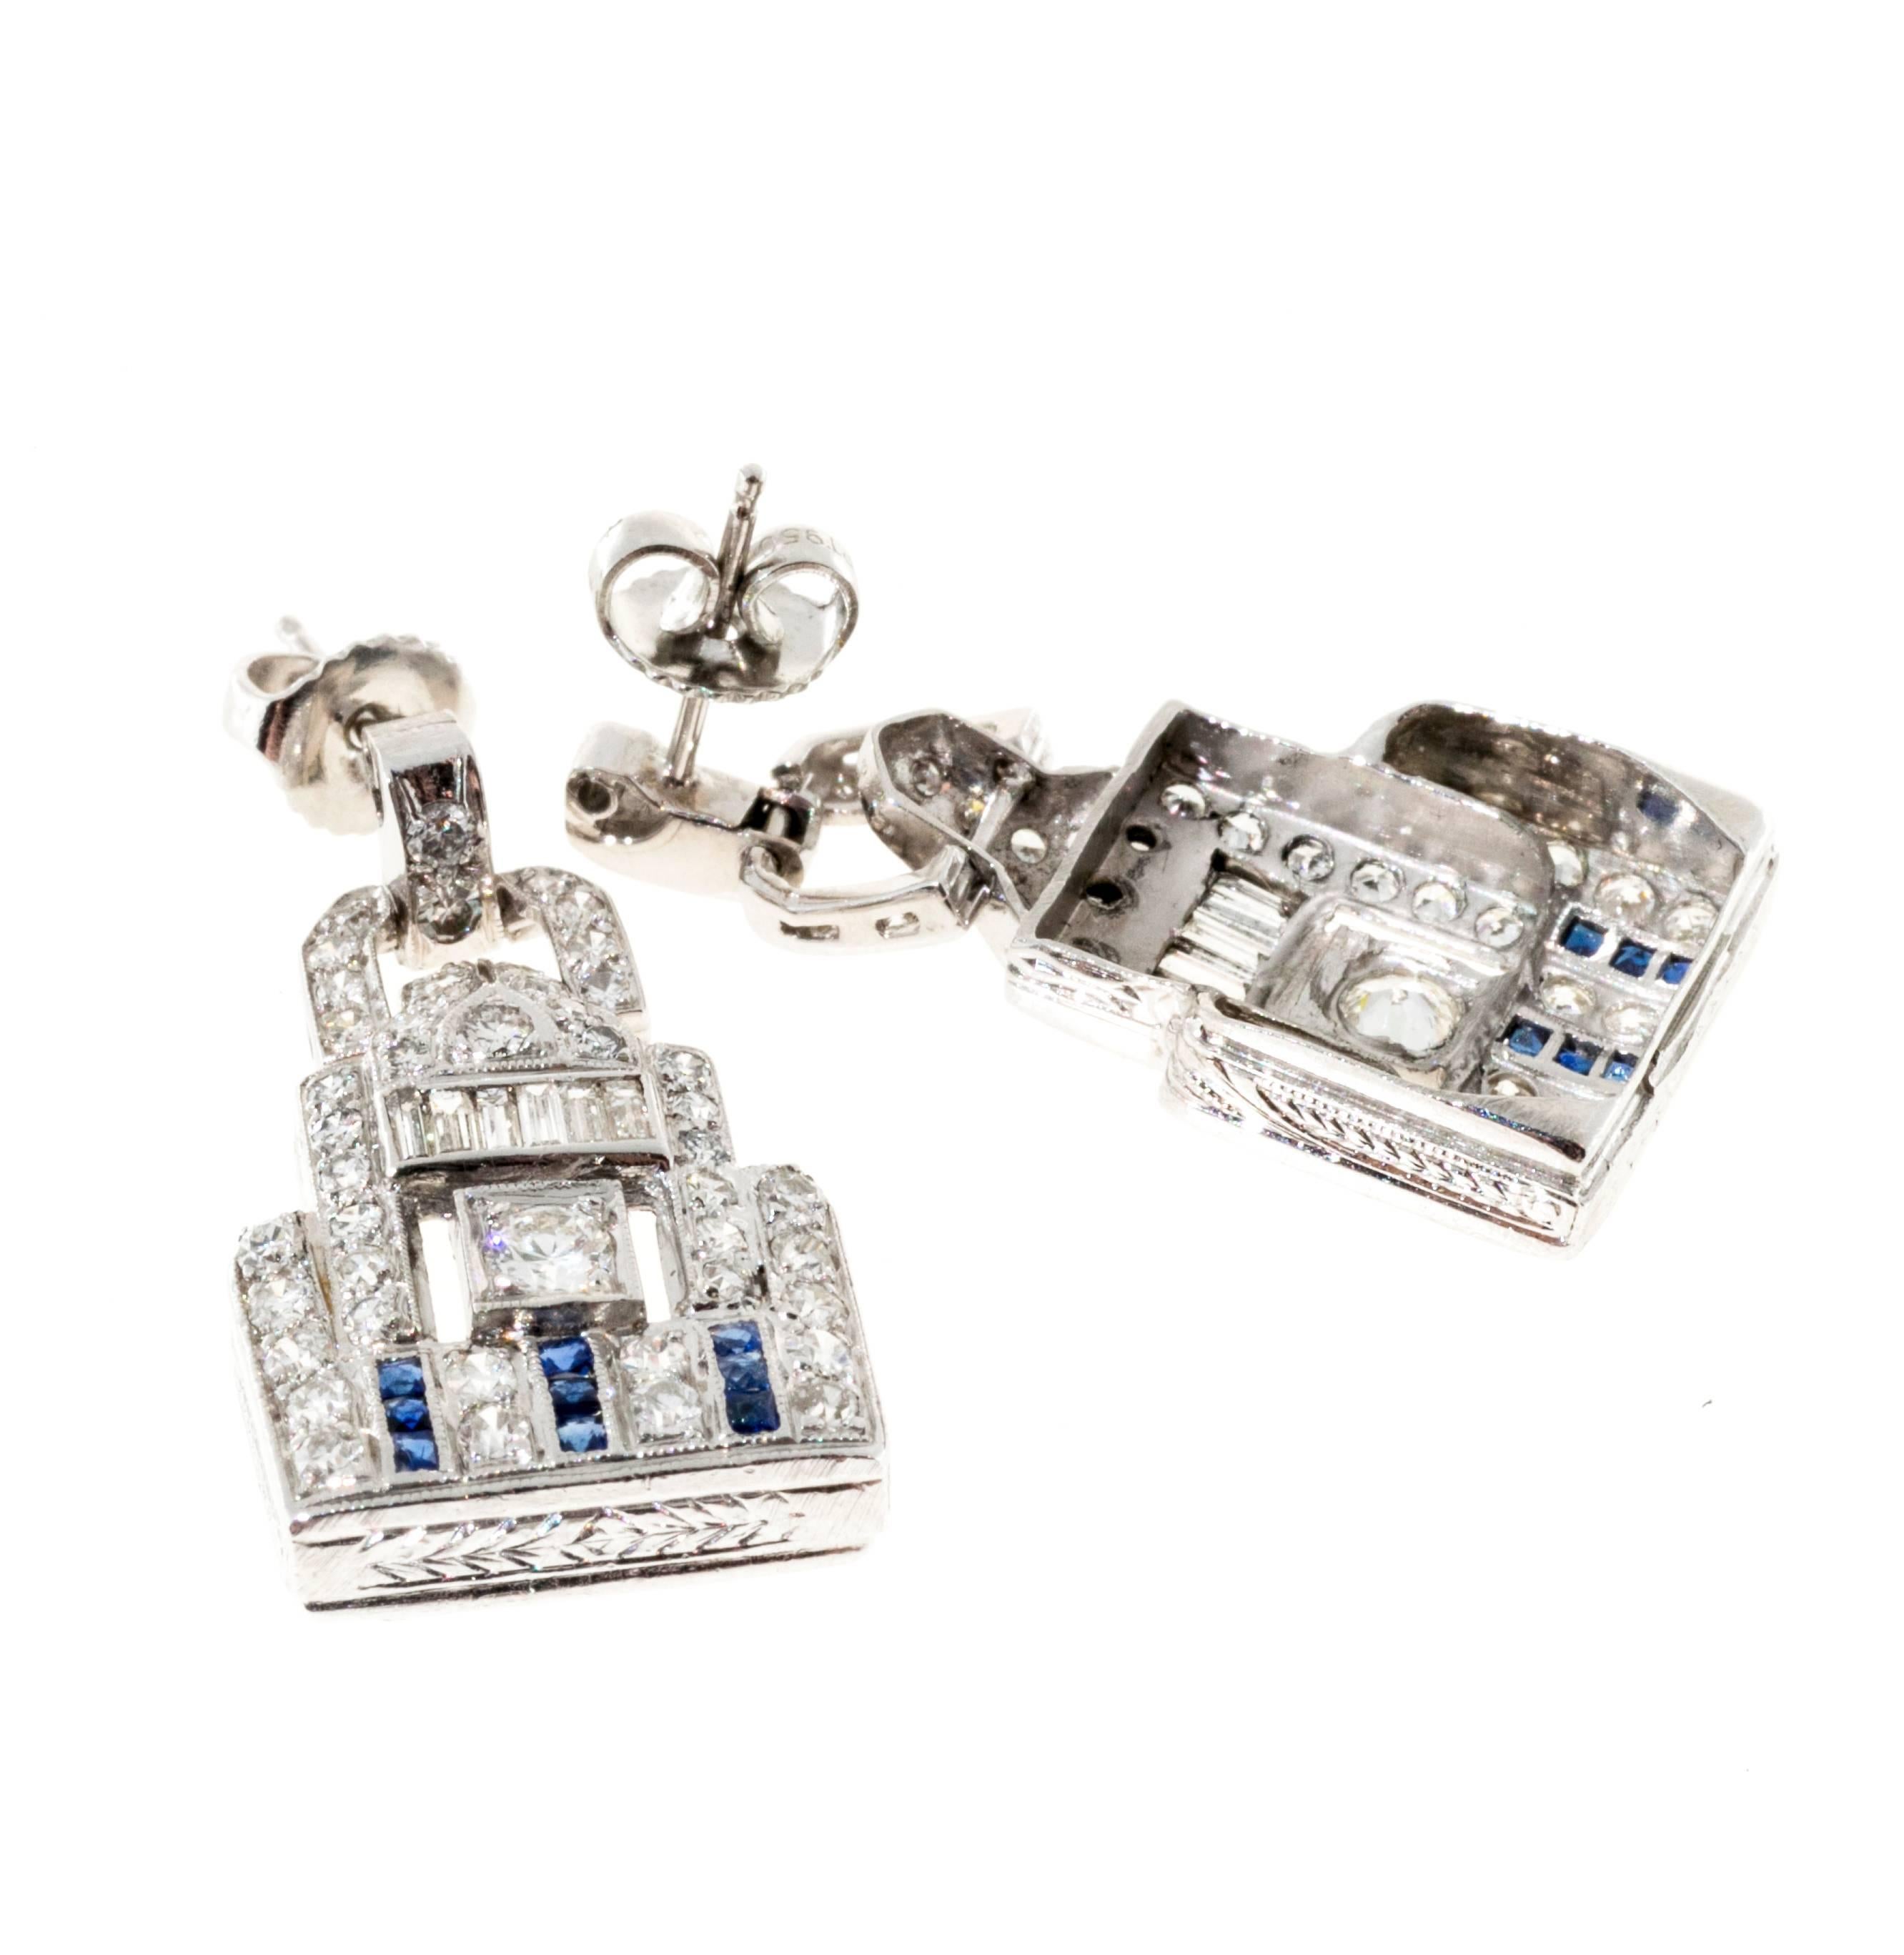 Sapphire and diamond Platinum dangle earrings.  Colorless, bright shiny diamonds and bright deep blue Sapphires. 

18 French calibre cut genuine Sapphires approx. total weight .33cts
12 straight baguette diamonds approx. total weight 2.00cts,